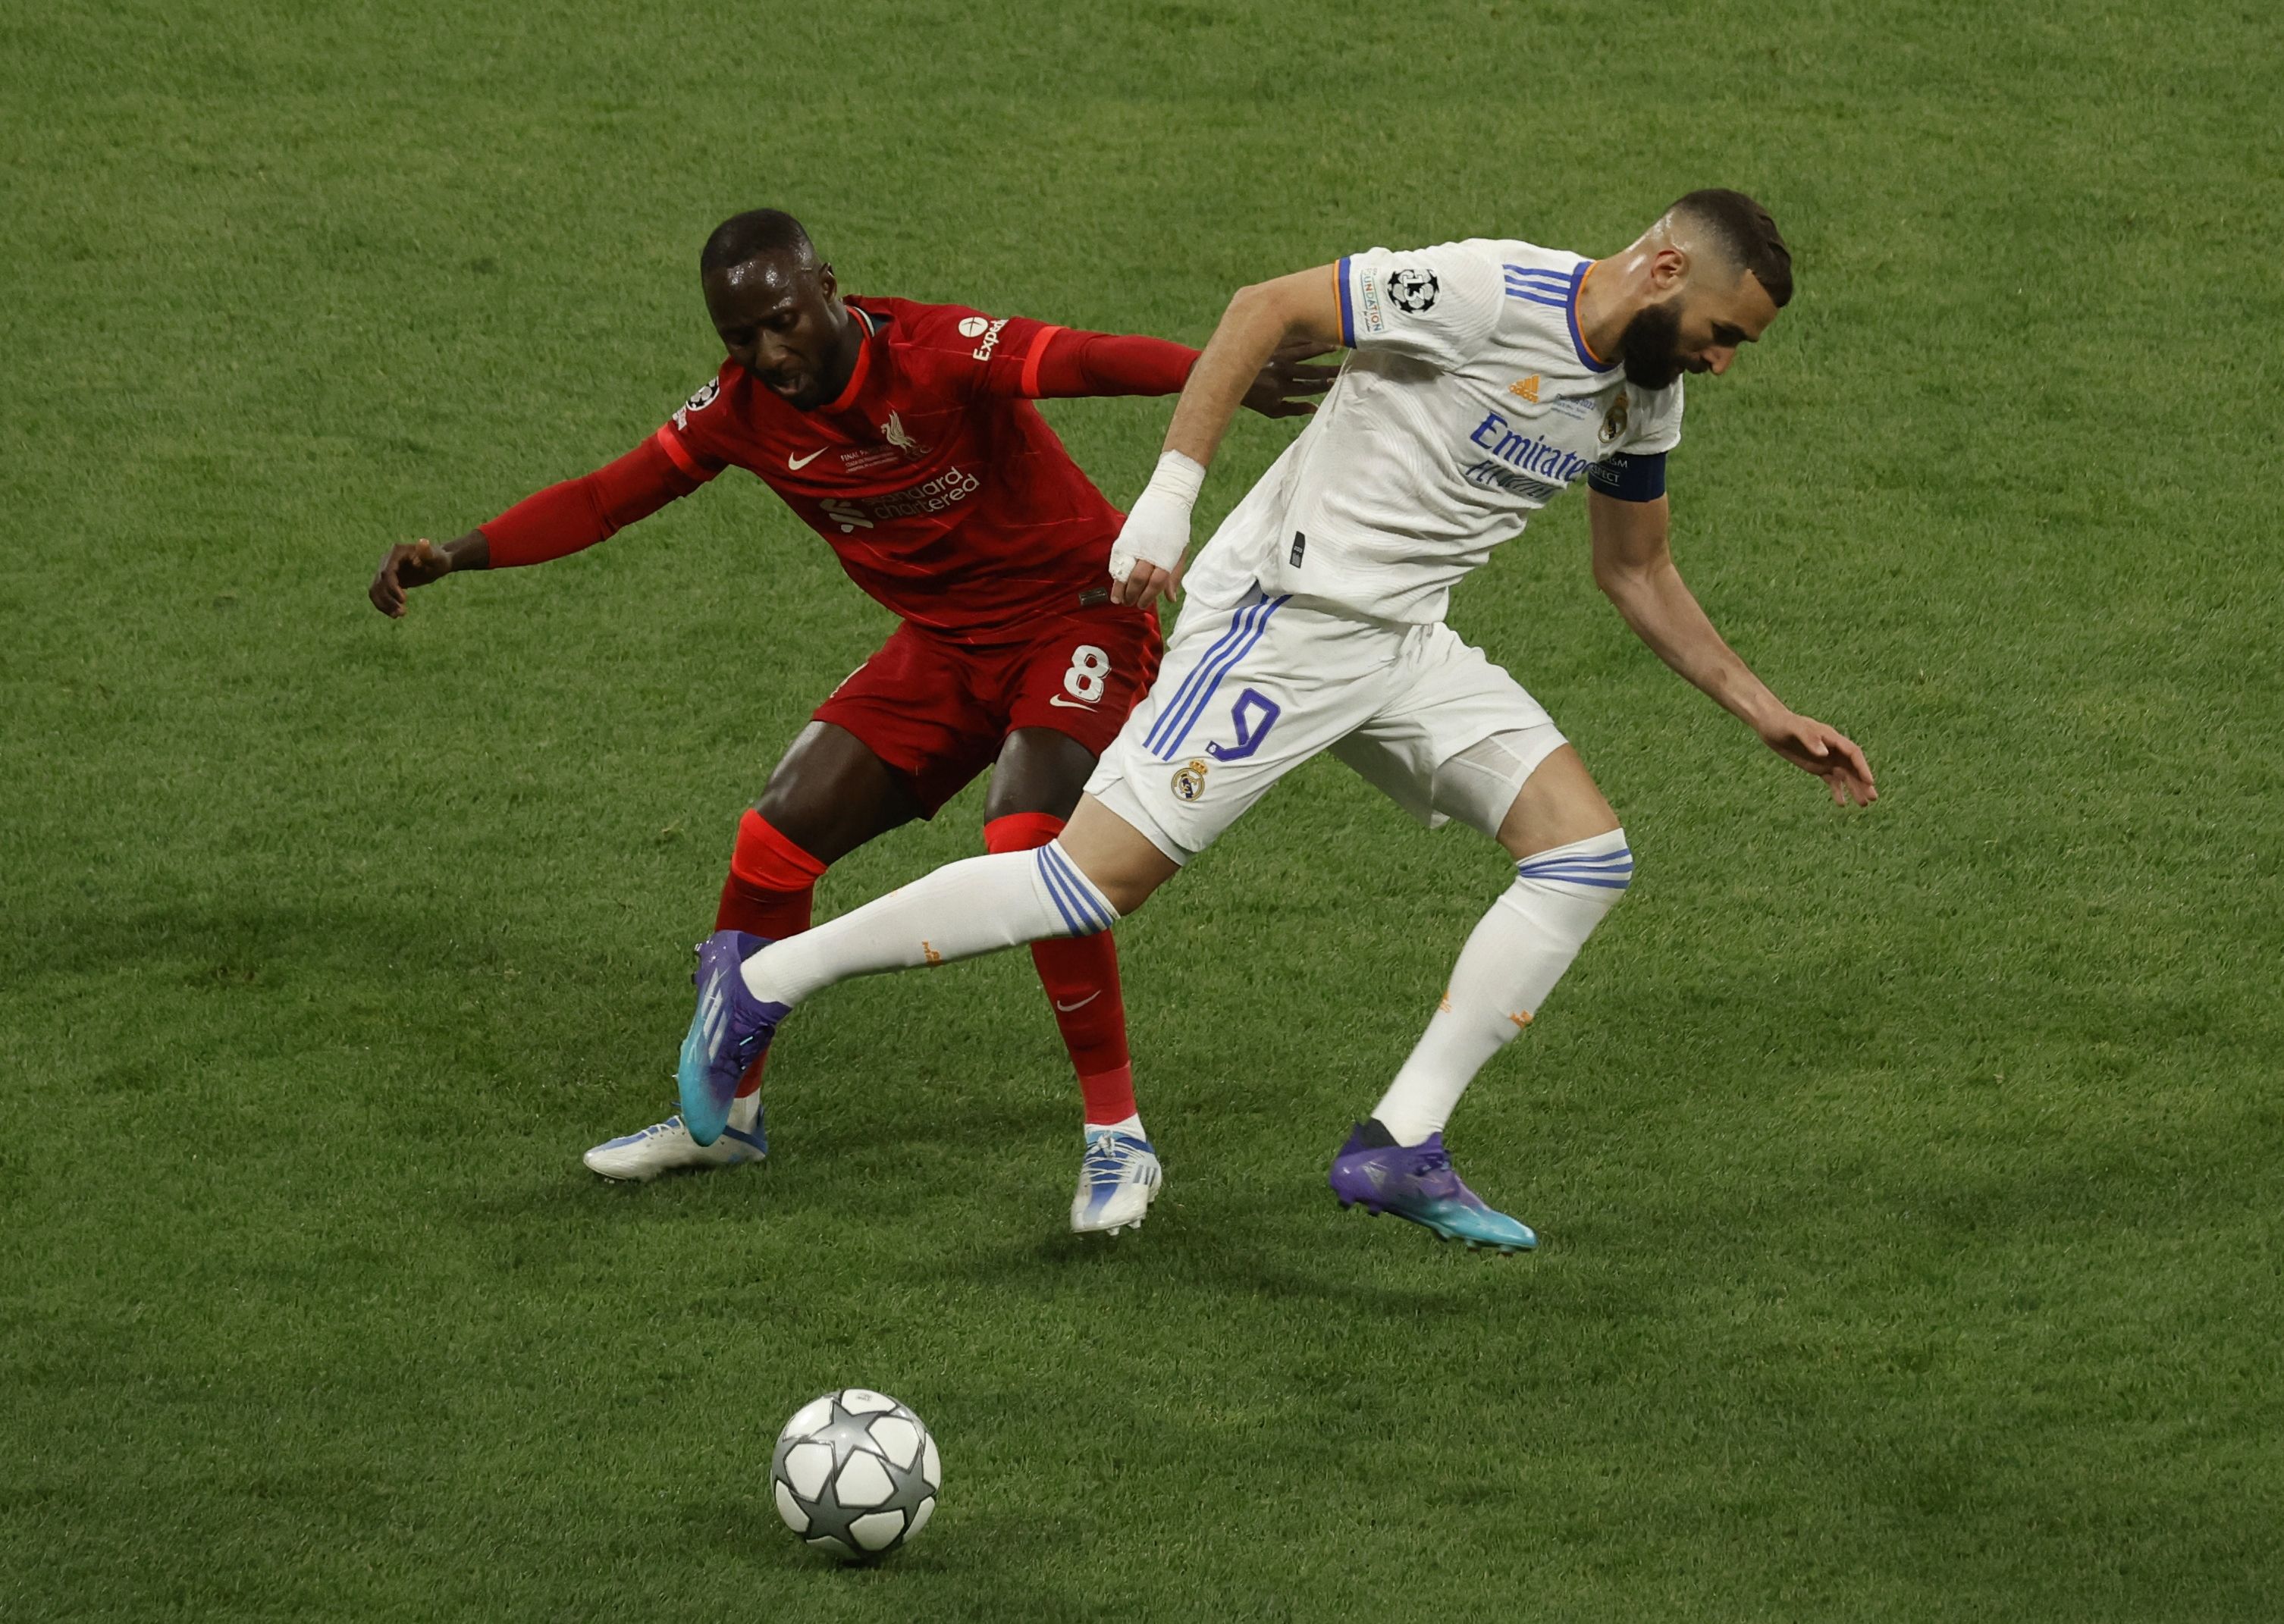 Soccer Football - Champions League Final - Liverpool v Real Madrid - Stade de France, Saint-Denis near Paris, France - May 28, 2022  Liverpool's Naby Keita in action with Real Madrid's Karim Benzema REUTERS/Gonzalo Fuentes